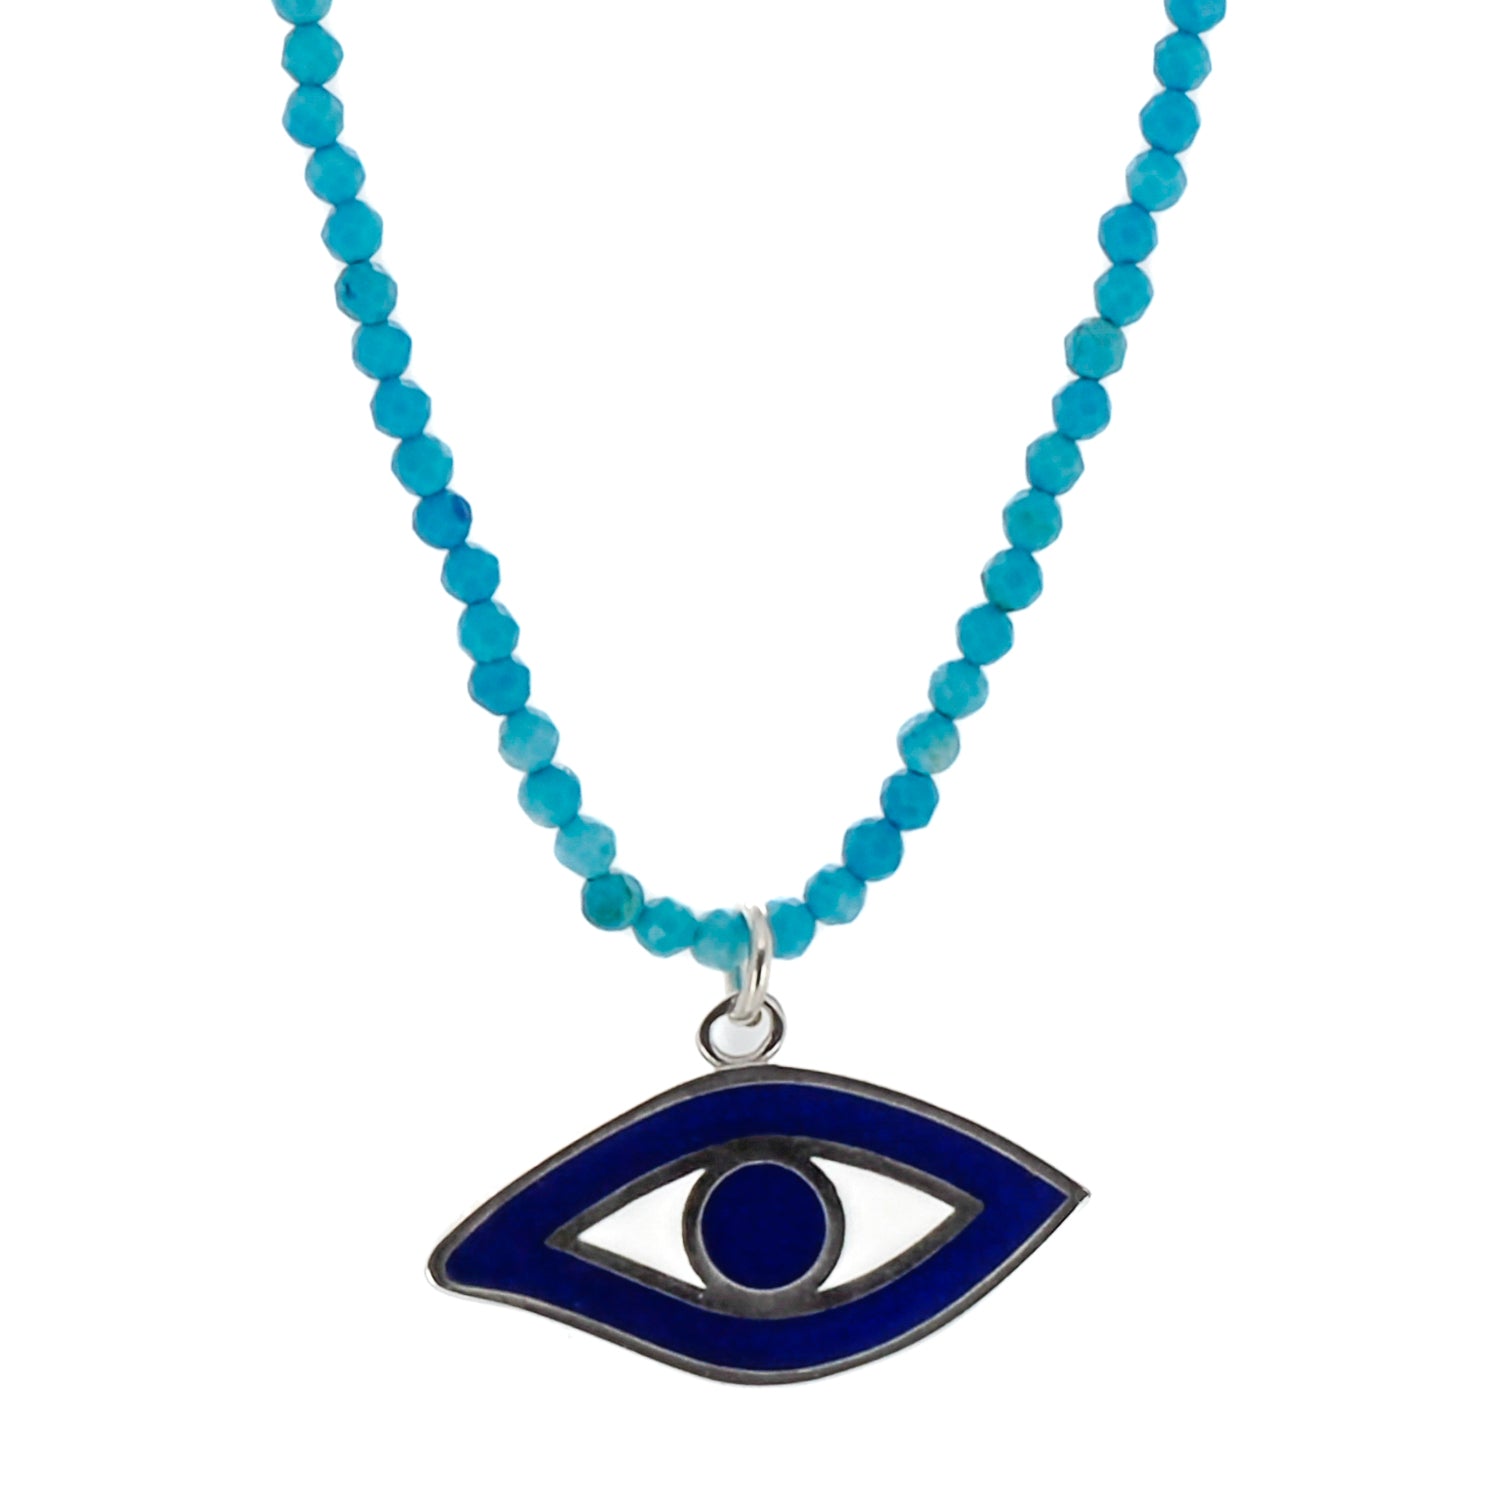 Turquoise Evil Eye Protection Necklace showcasing natural turquoise stone beads and an 18k gold plated Evil Eye charm.